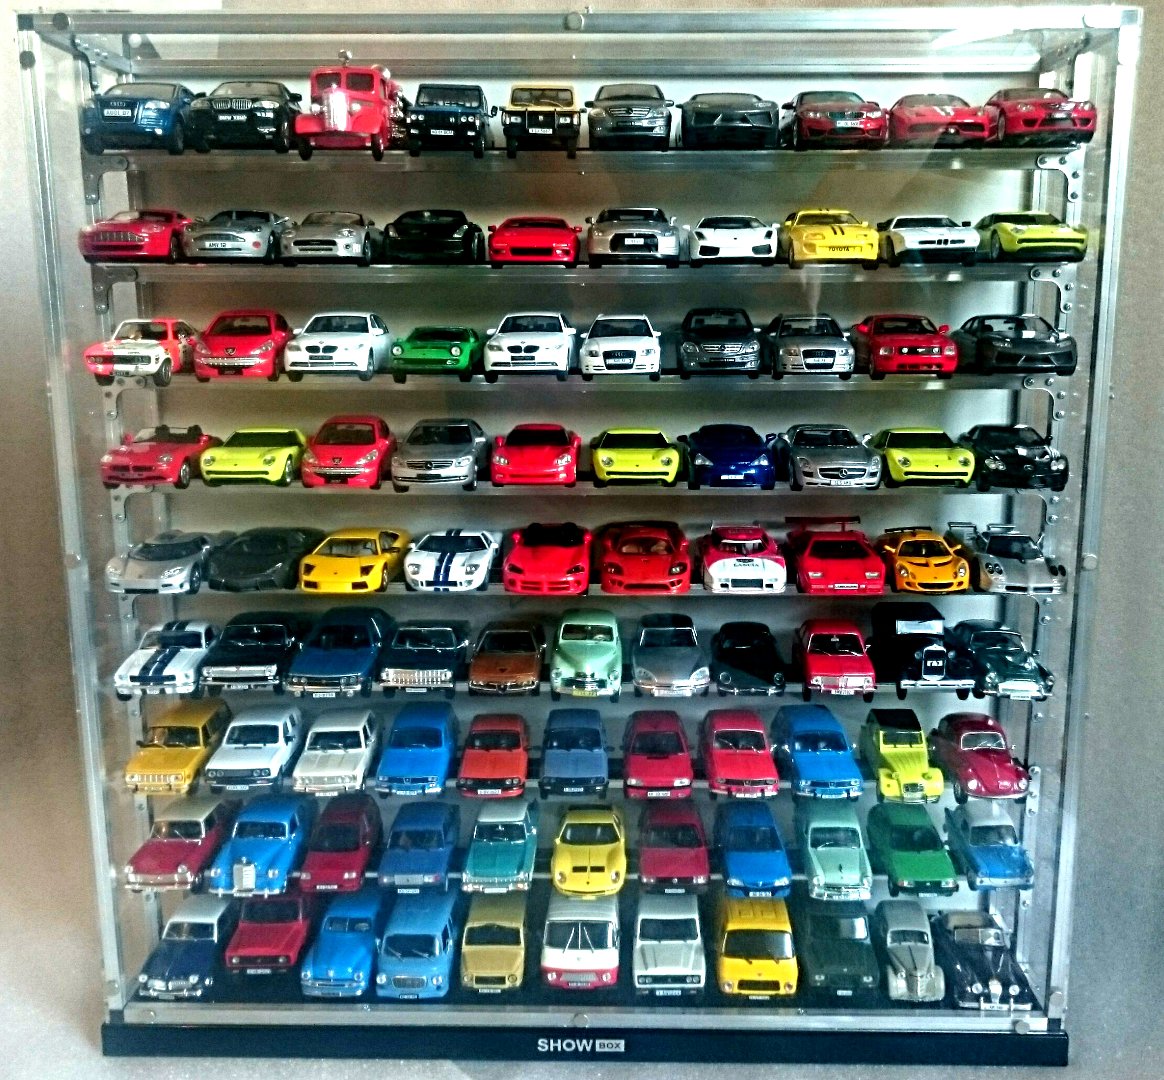 Showbox Vitrine Display Cabinets For Diecast Collectors Models 1 18